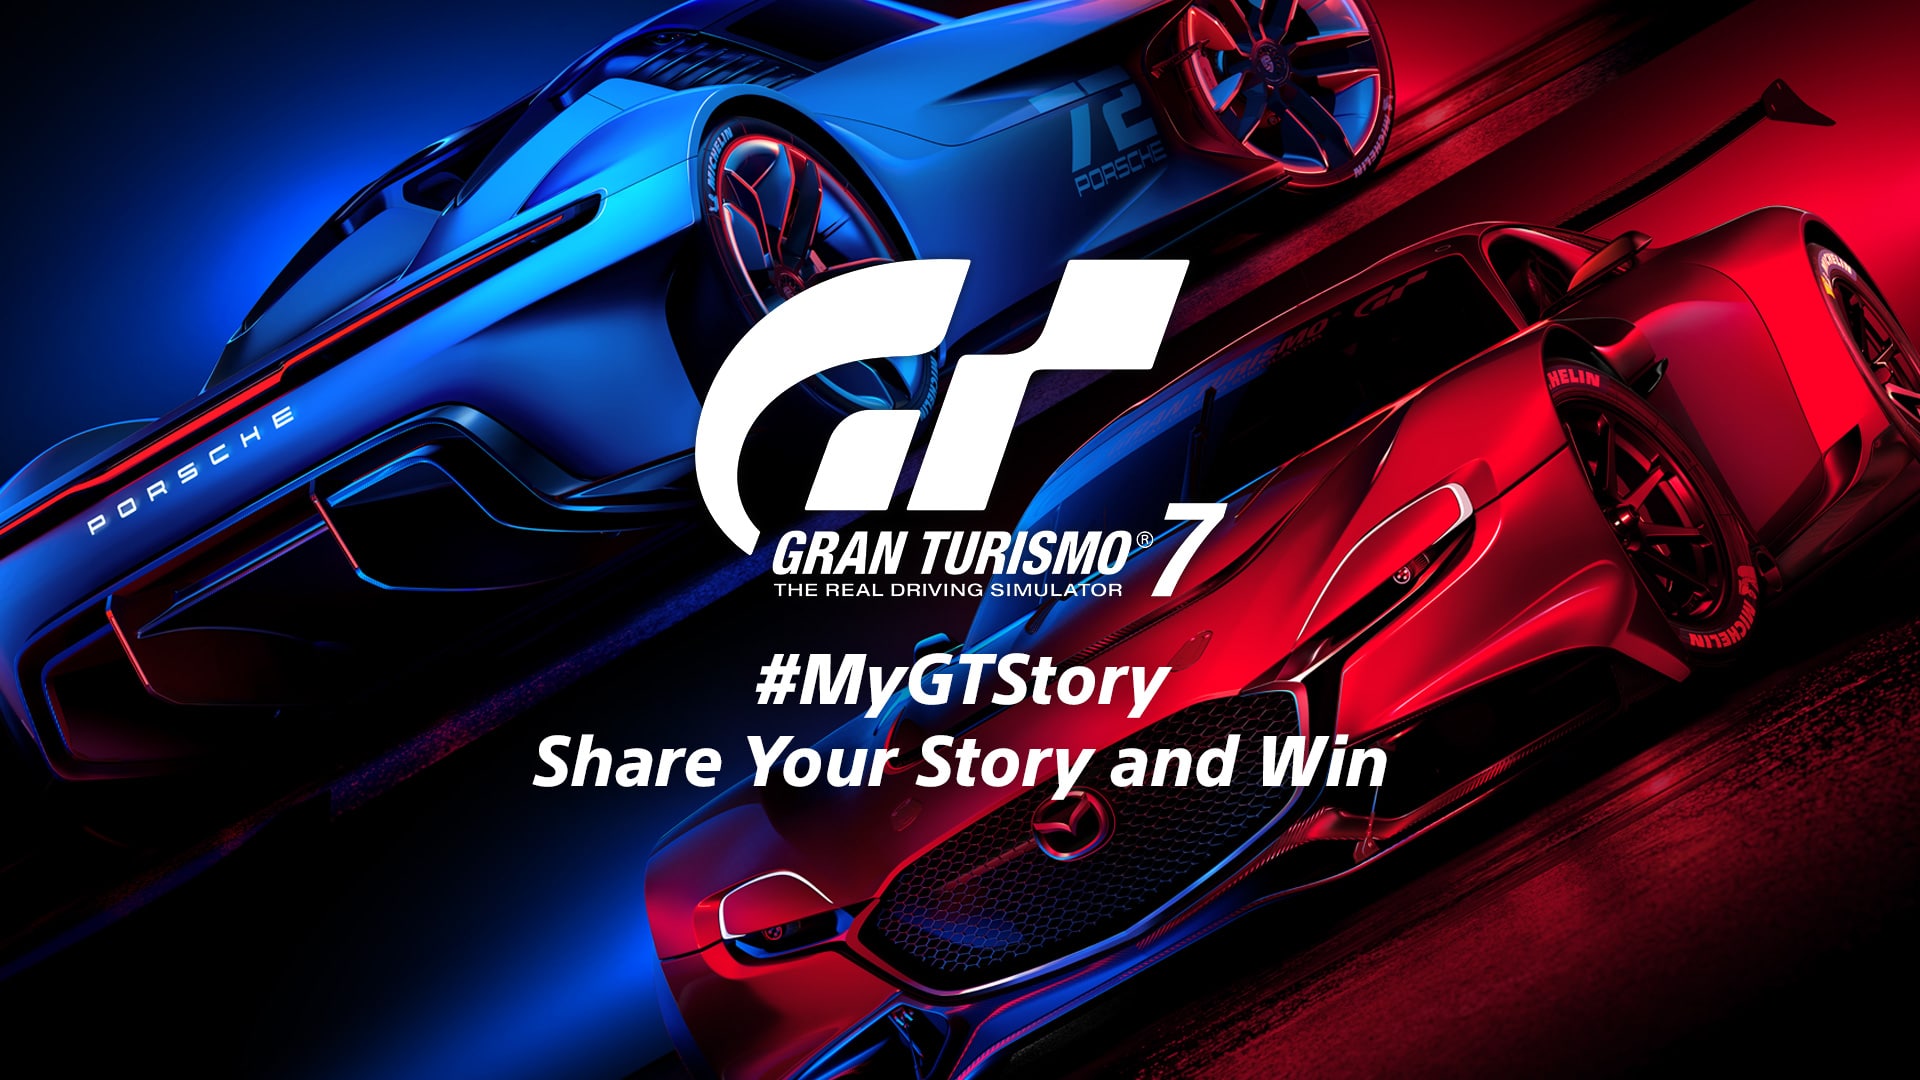 mygtstory campaign